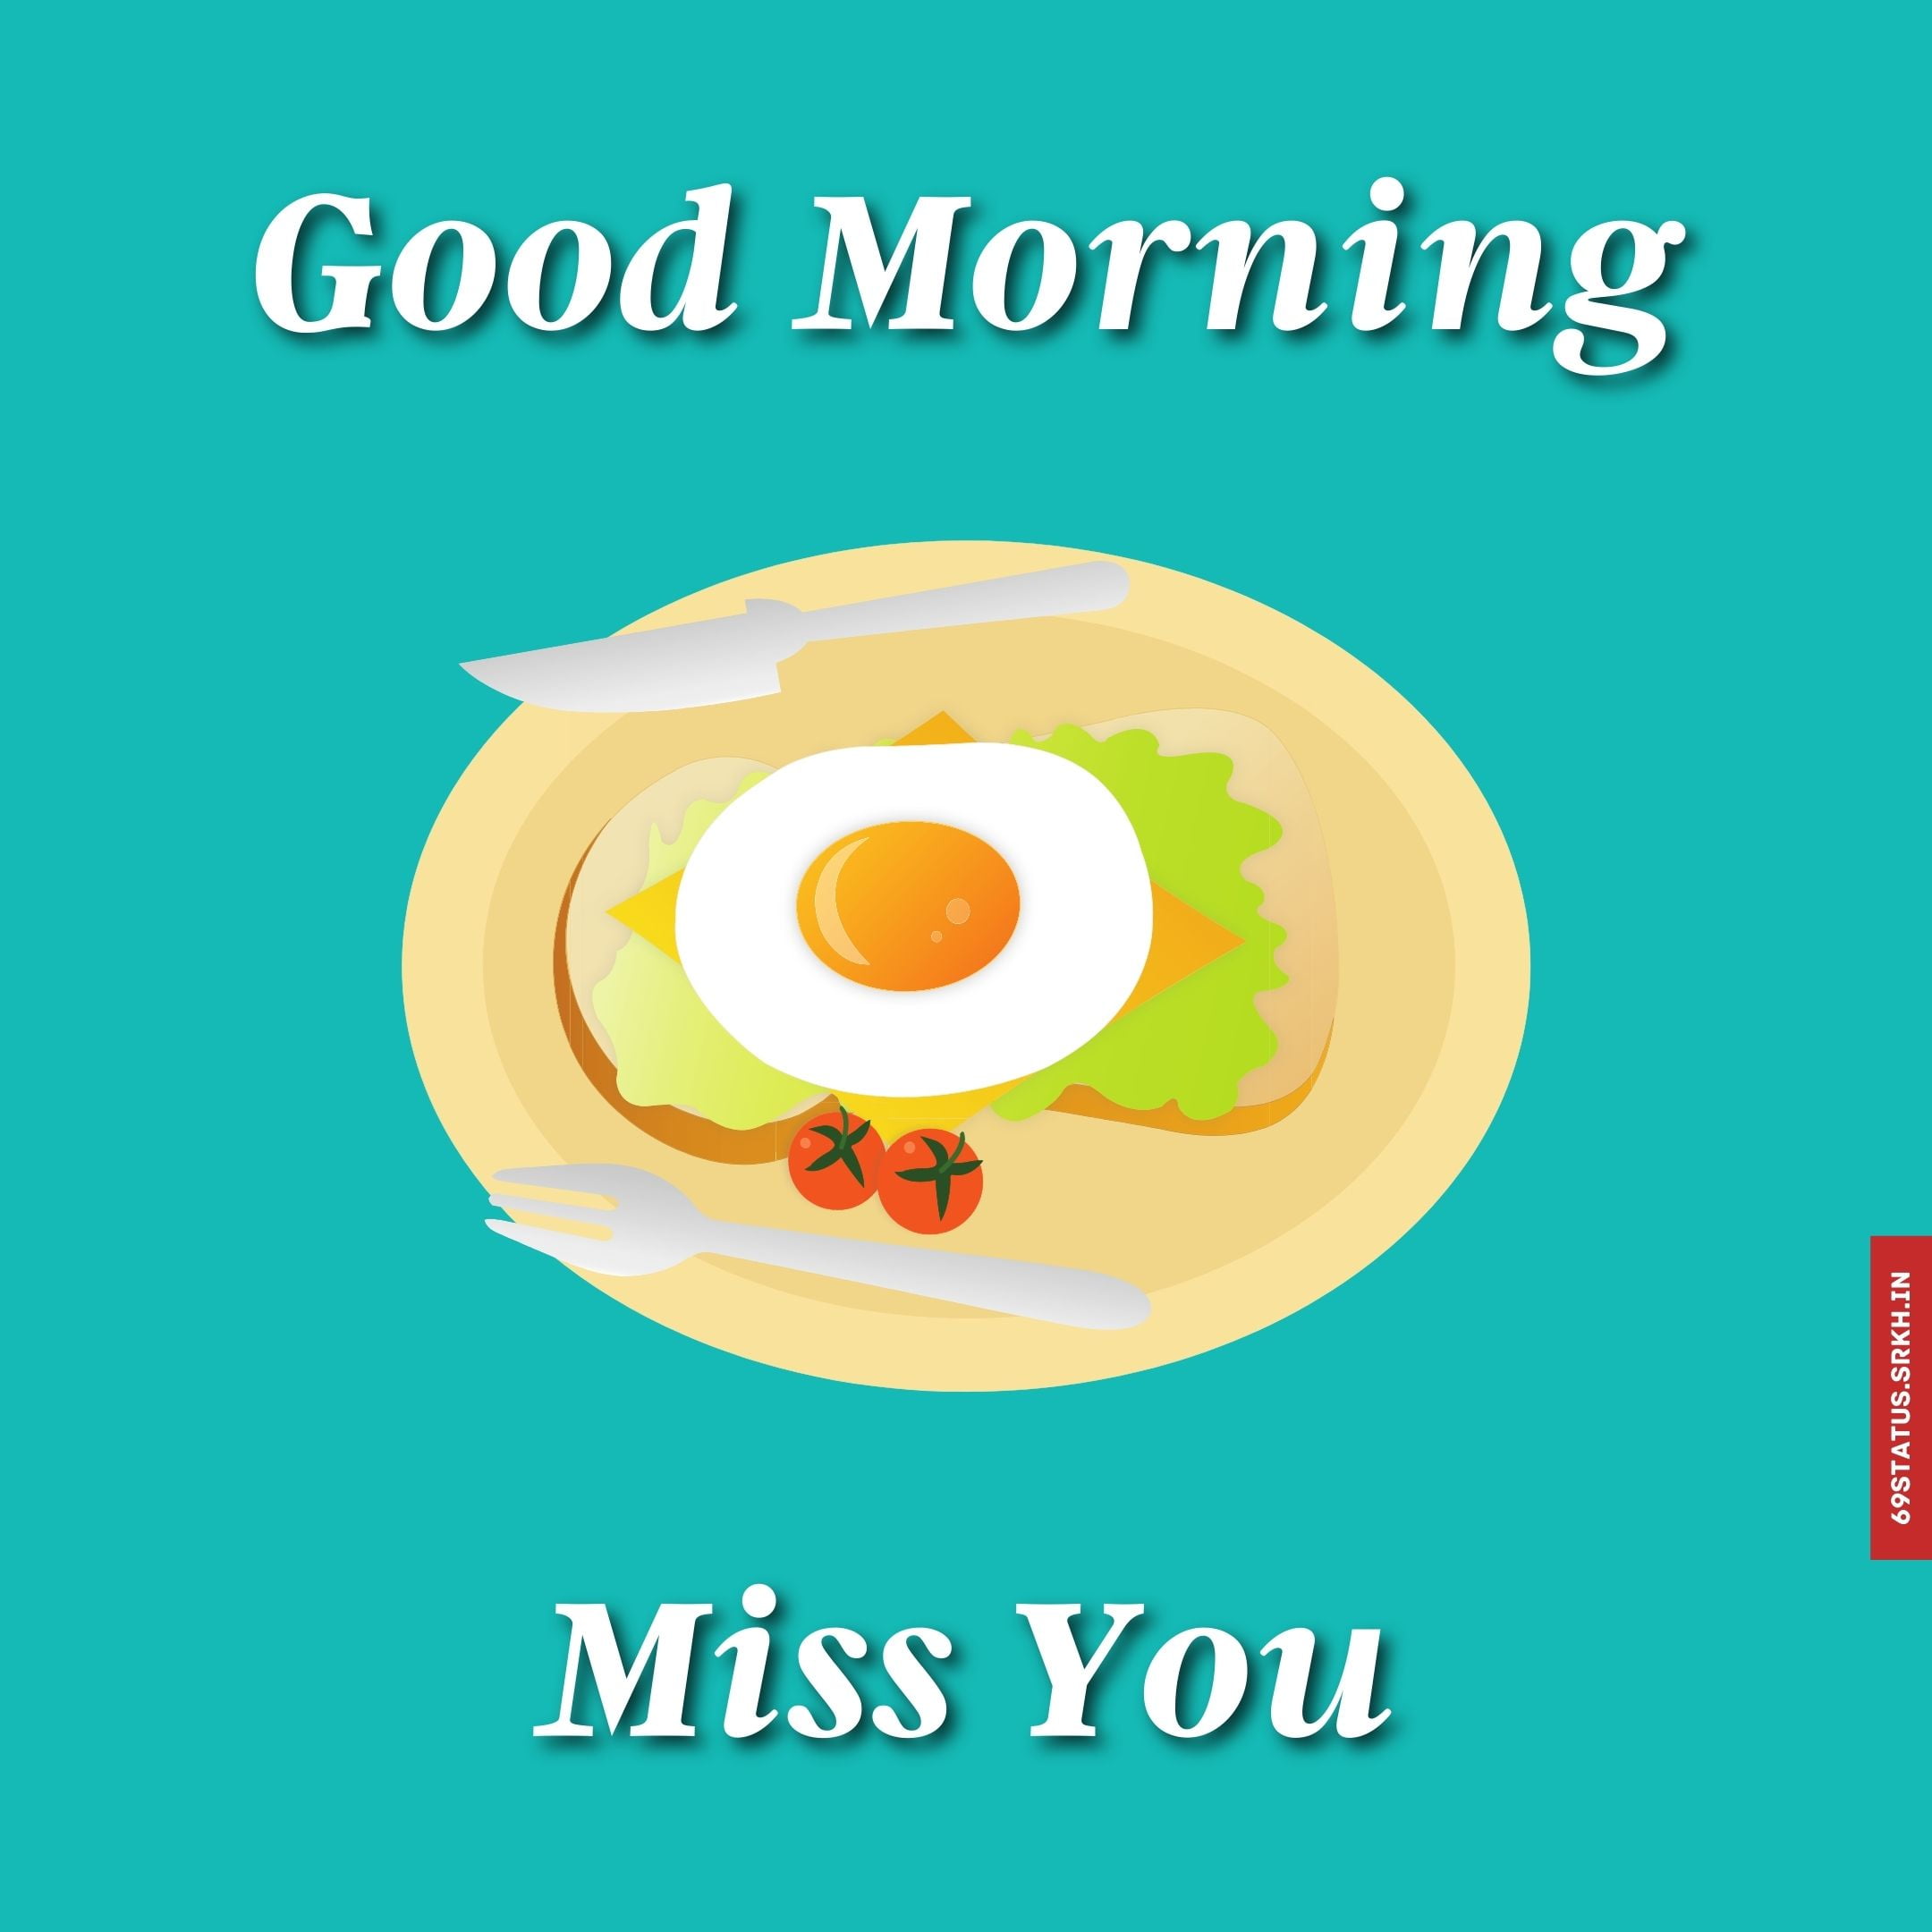 Good morning miss you images full HD free download.